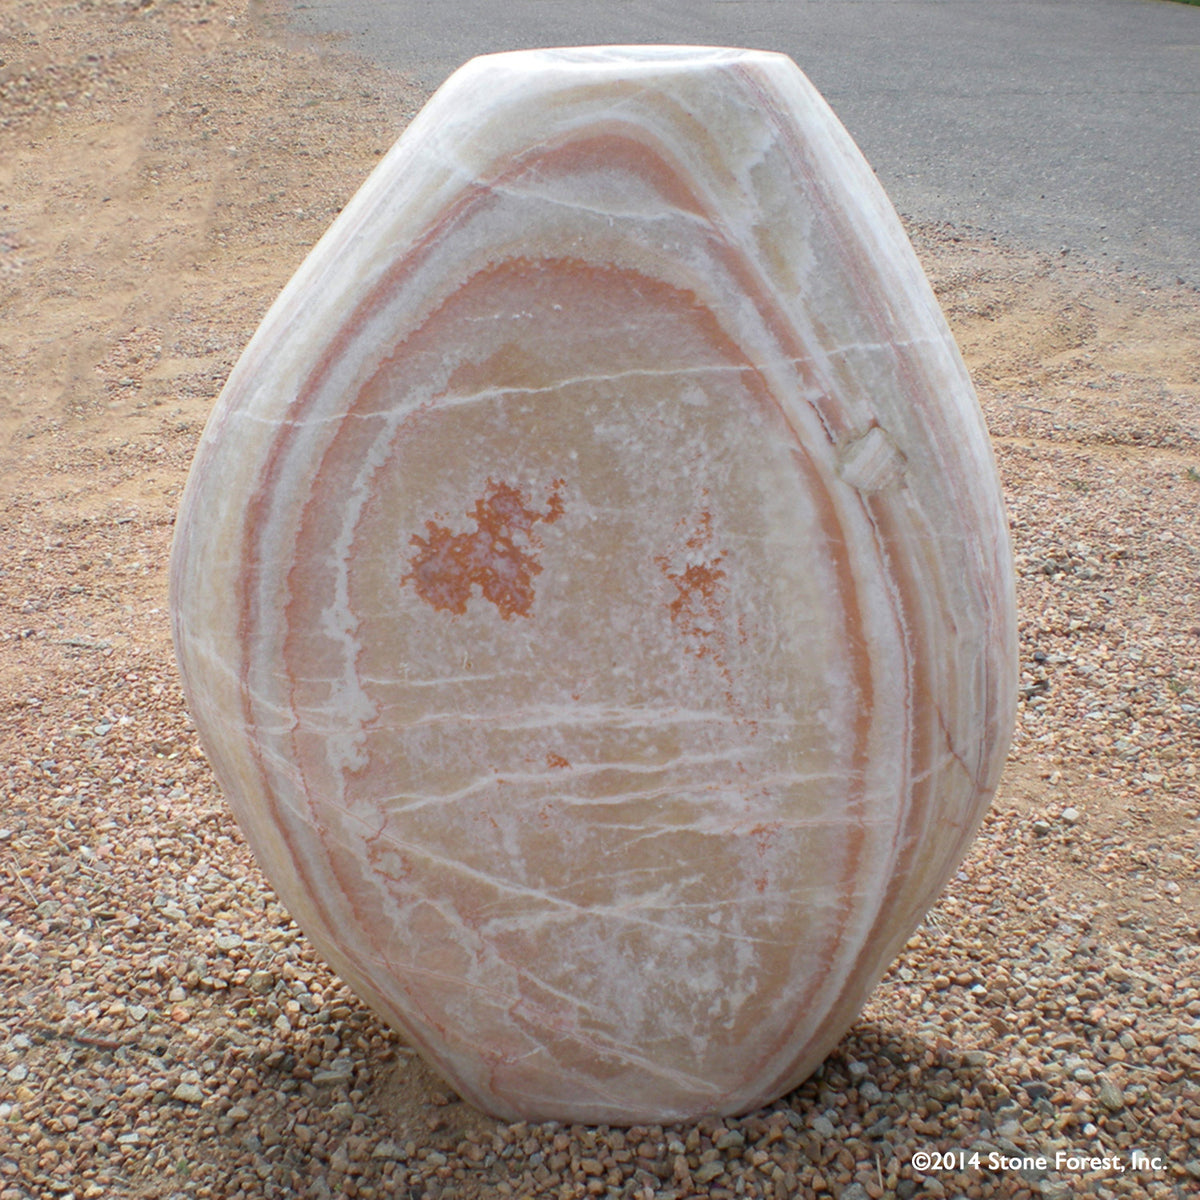 Stone Forest Pebble garden fountain carved from onyx 36